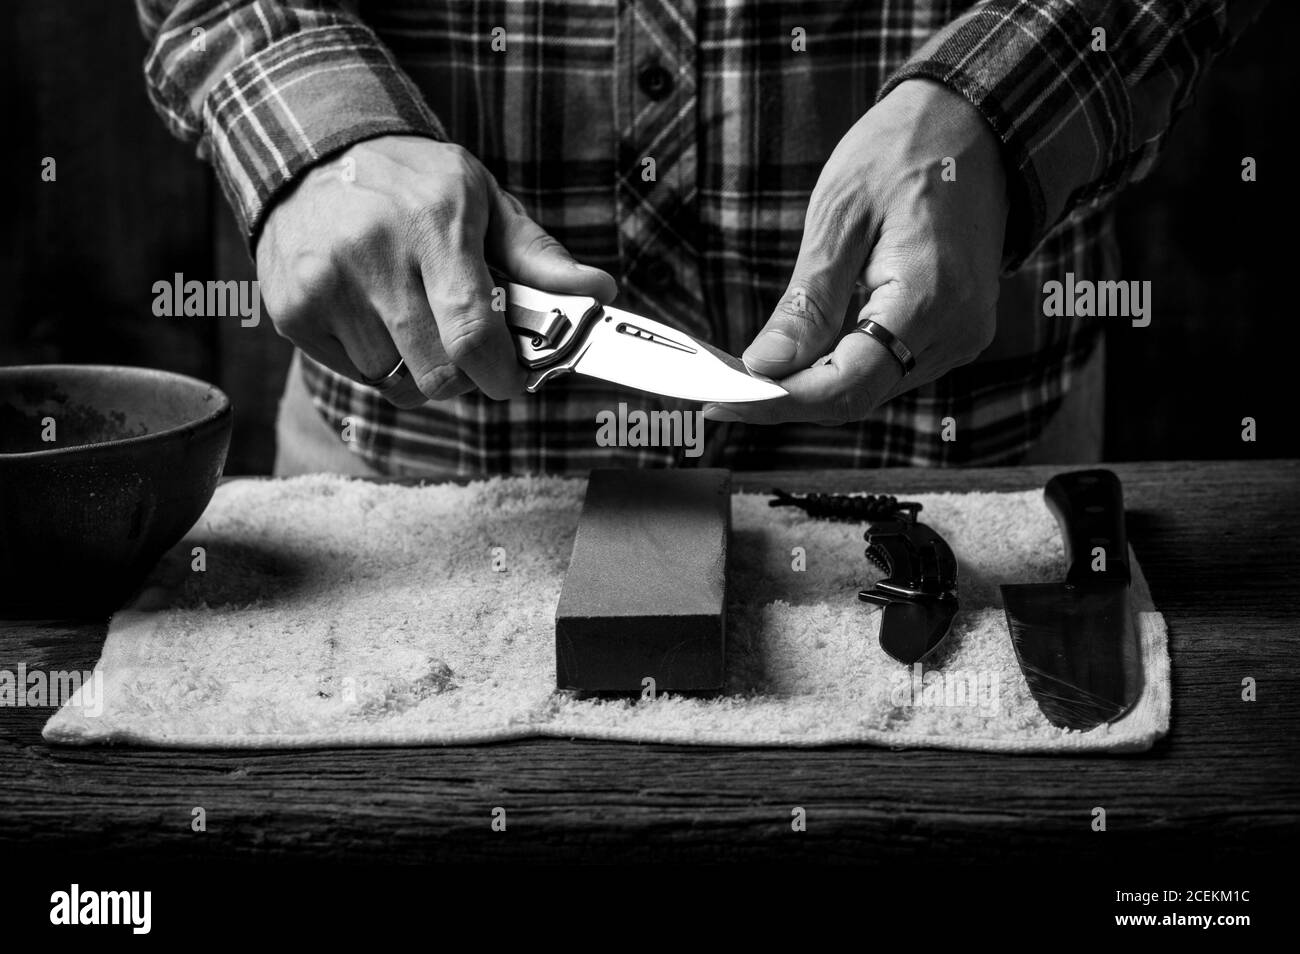 Premium Photo  The man using whetstone to sharpening his pocket knife  pocket knife care and maintenance concept